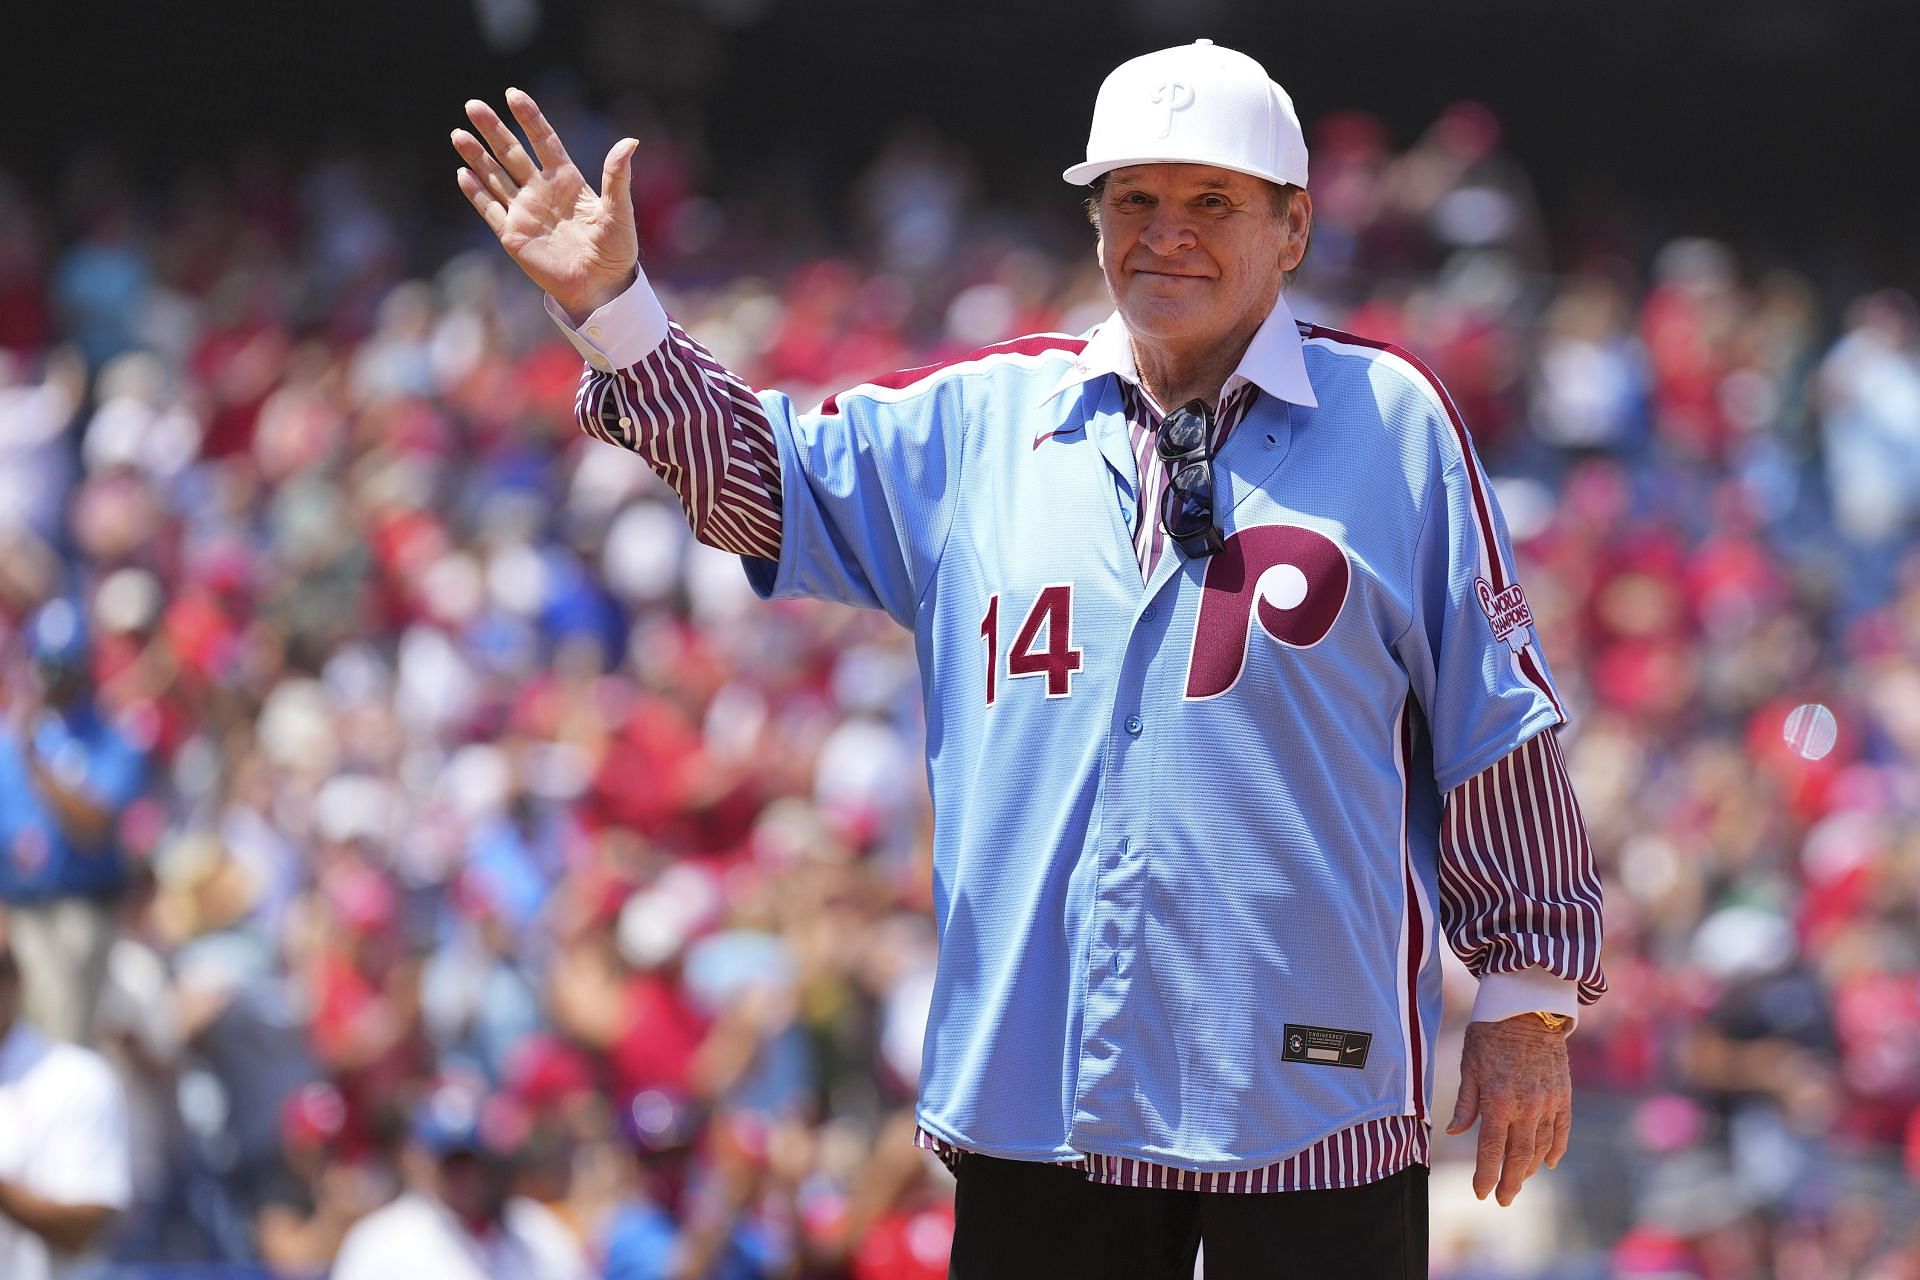 Former Philadelphia Phillies player Pete Rose acknowledges the crowd at Citizens Bank Park